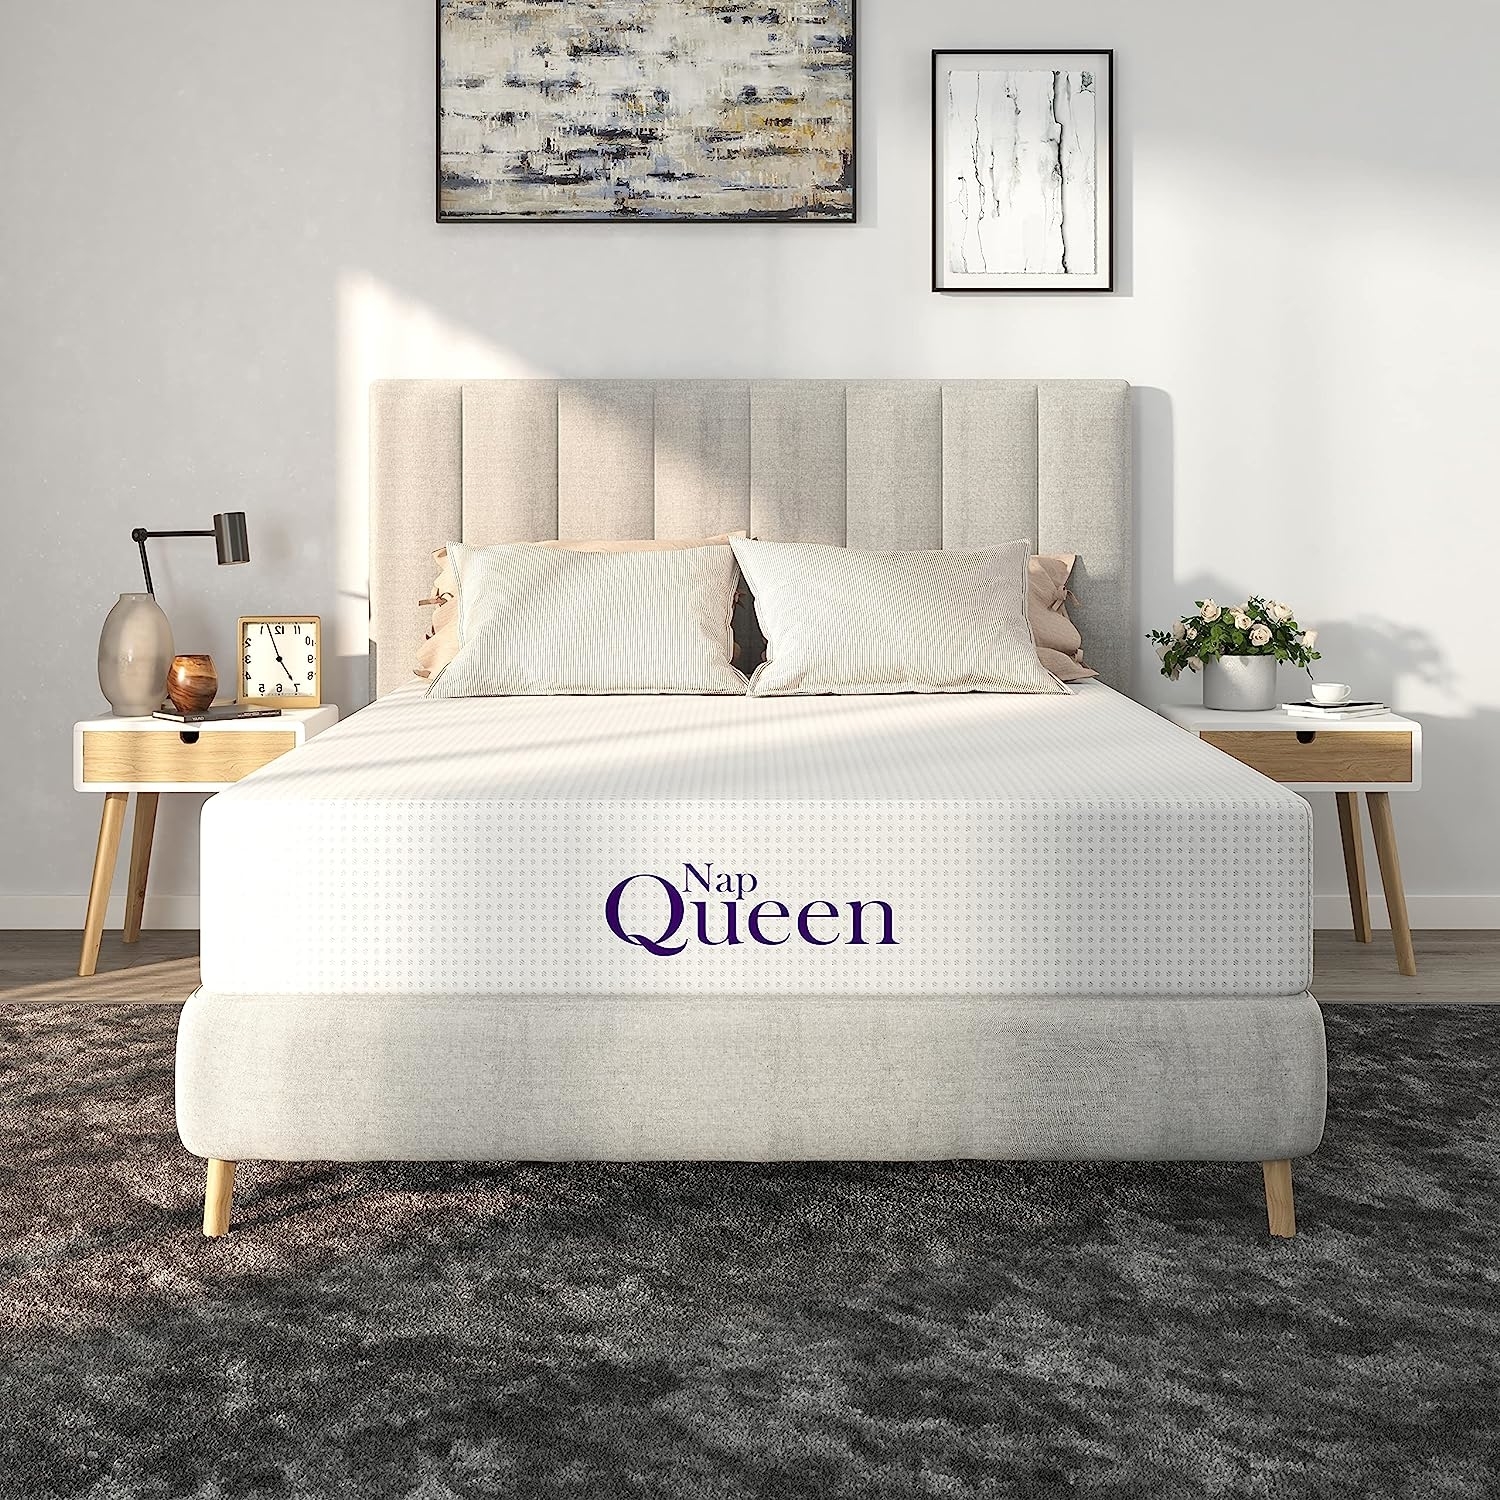 A modern, neatly made bed with &quot;Nap Queen&quot; text on the comfortable-looking mattress in a stylish bedroom setting